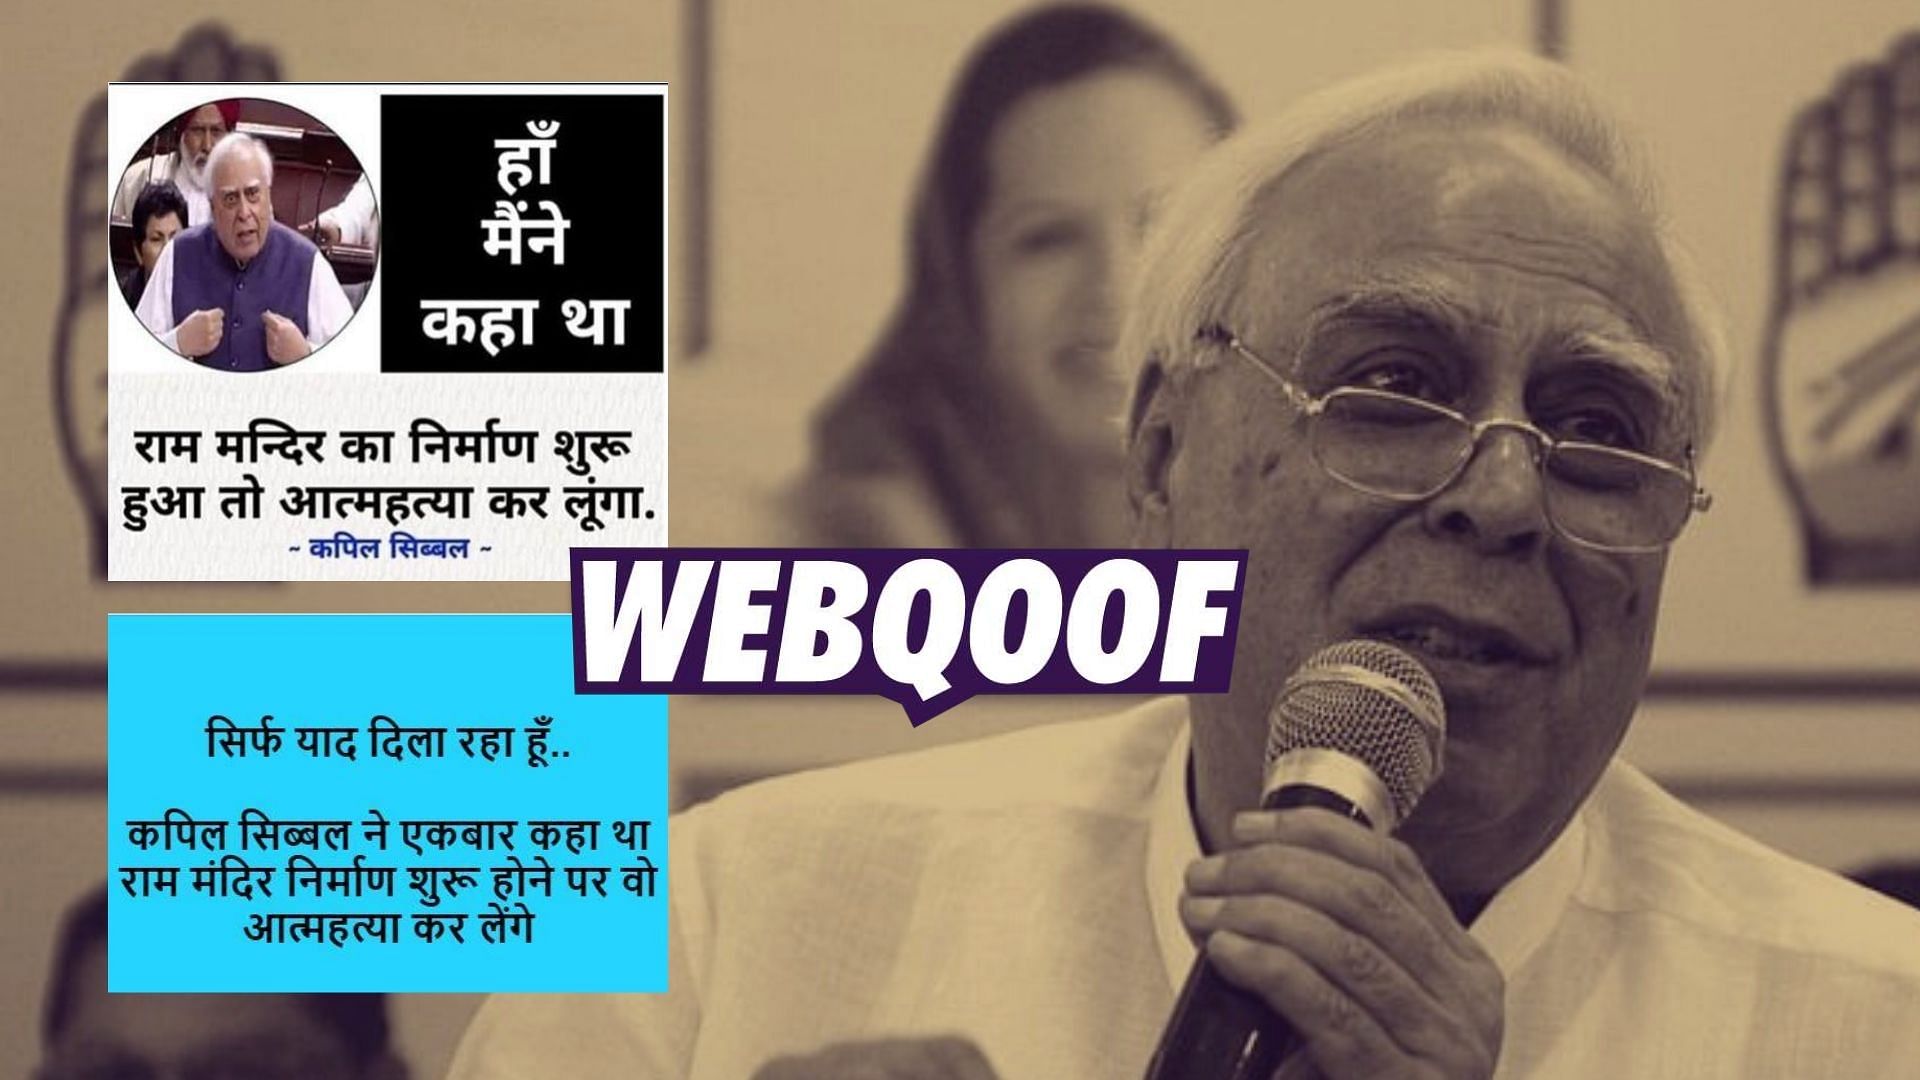 A fake quote attributed to Congress leader <a href="https://www.thequint.com/author/1264456/kapil-sibal">Kapil Sibal</a> has resurfaced on the internet ahead of the ‘Bhoomi Poojan’ scheduled at the <a href="https://www.thequint.com/topic/ram-mandir">Ram Mandir site in Ayodhya</a>.